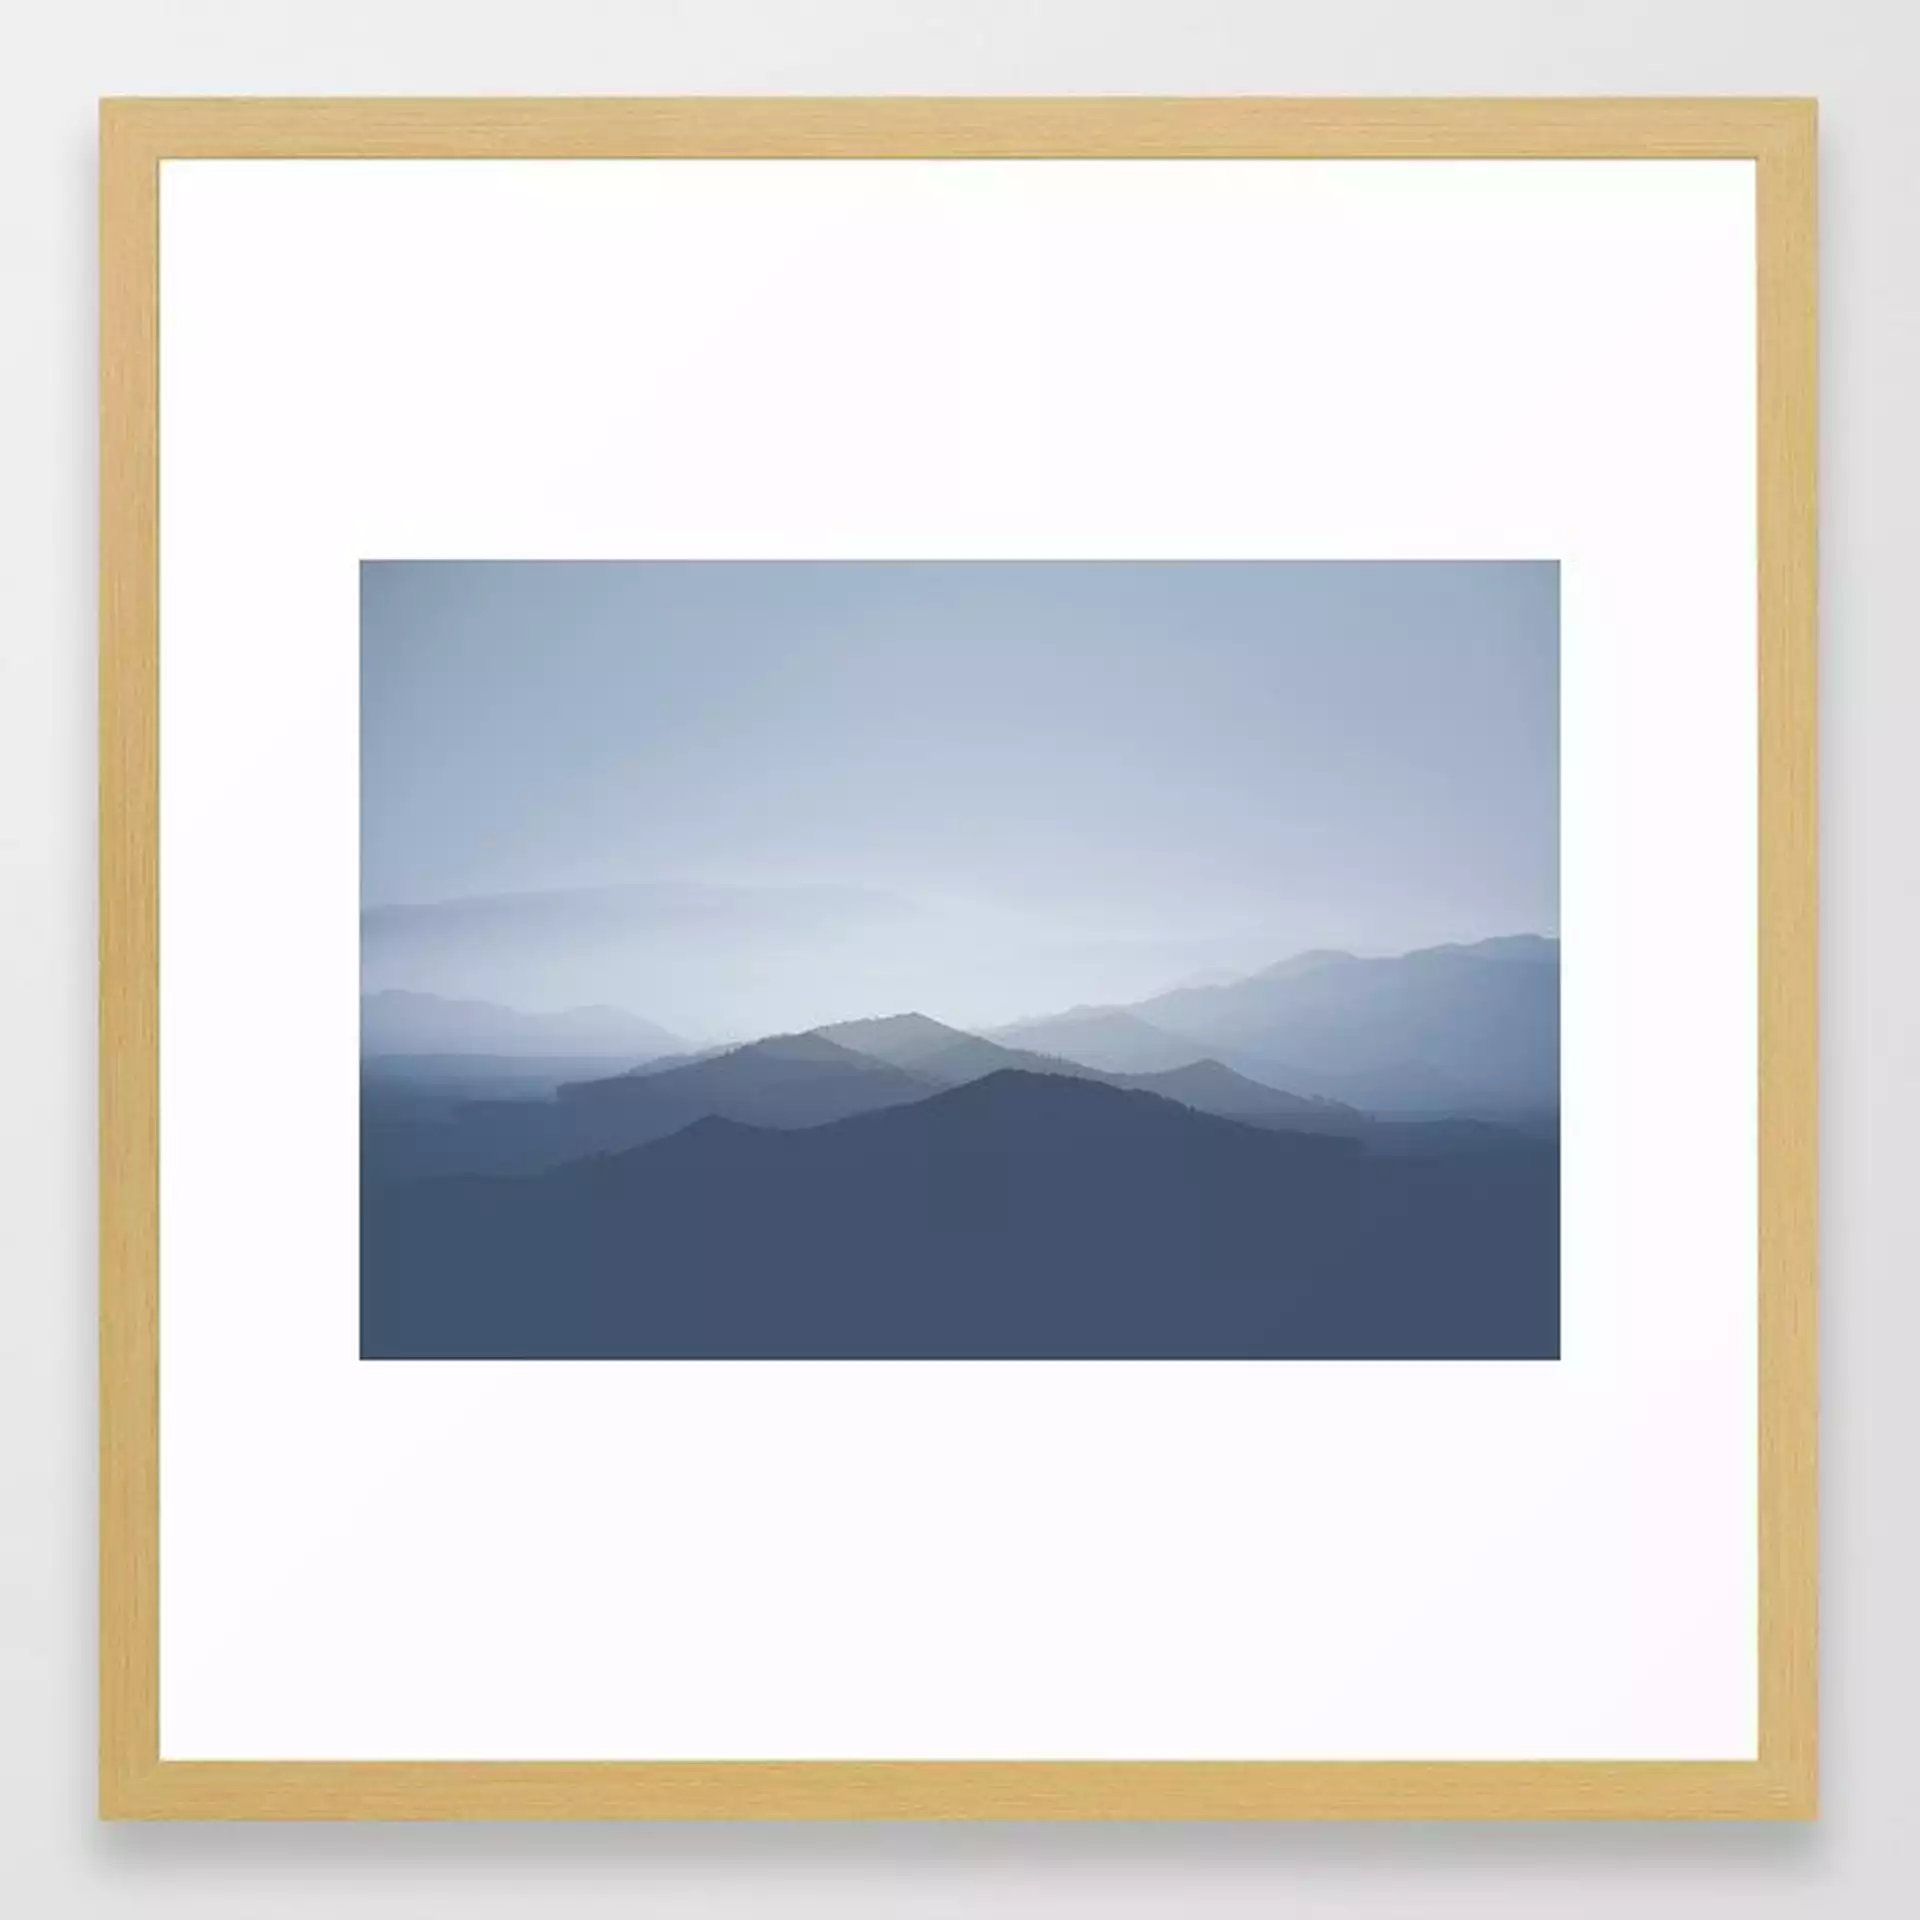 Hazy Morning Blues Framed Art Print by Ingrid Beddoes Photography - Conservation Natural - MEDIUM (Gallery)-22x22